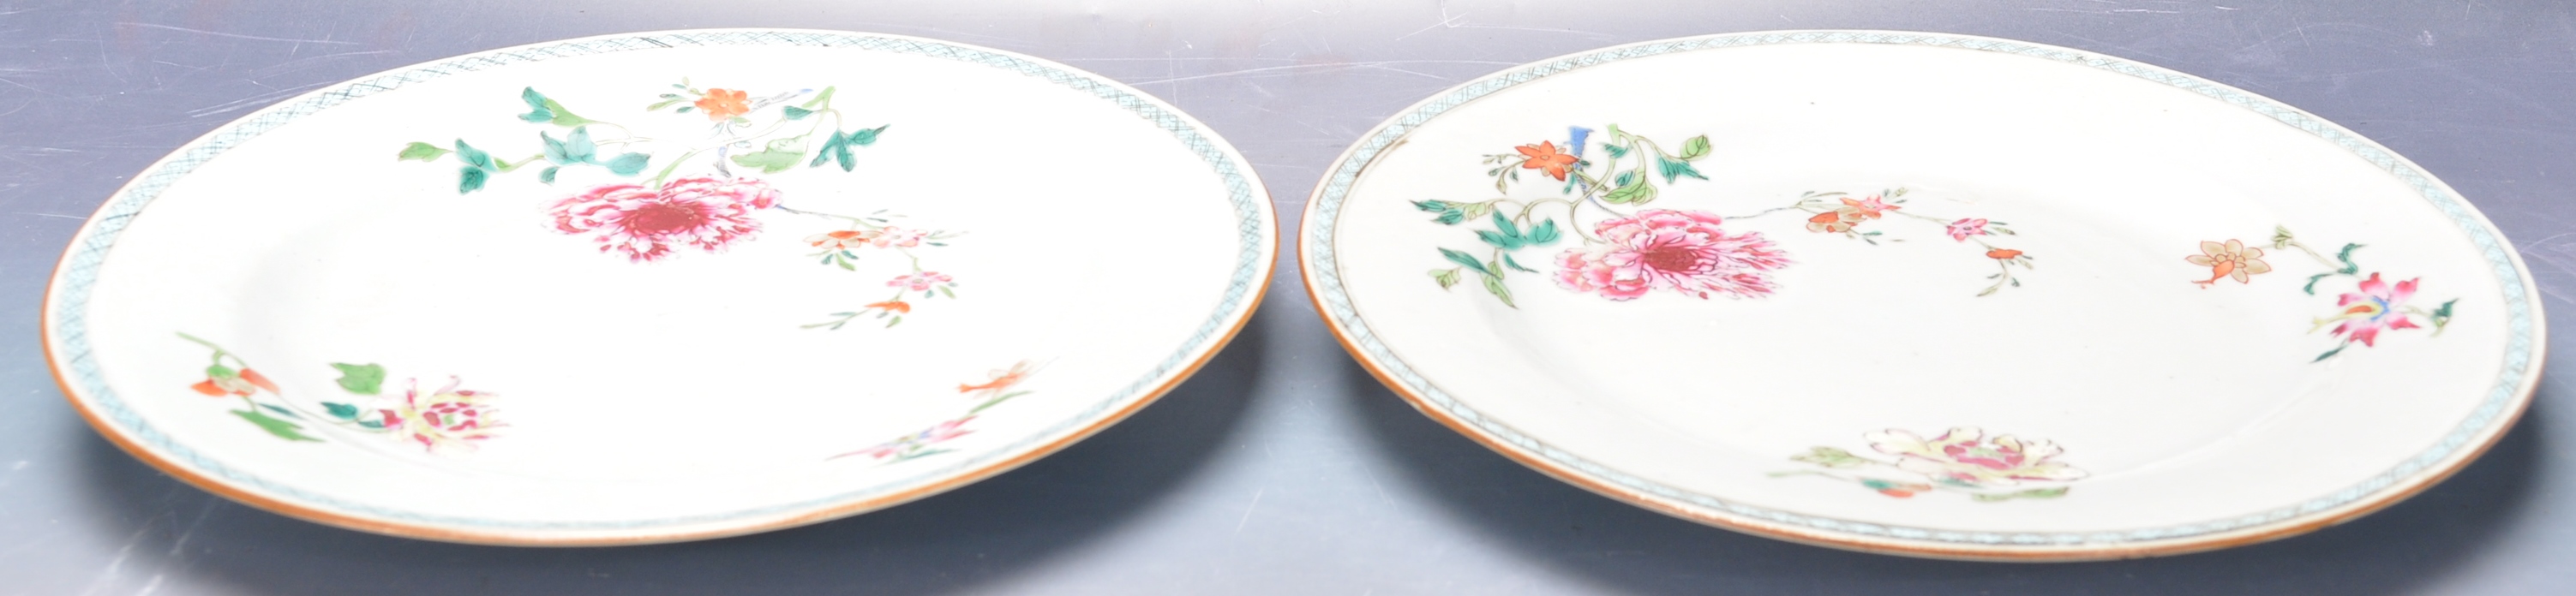 TWO 18TH CENTURY CHINESE ORIENTAL CERAMIC PORCELAIN PLATES - Image 3 of 6